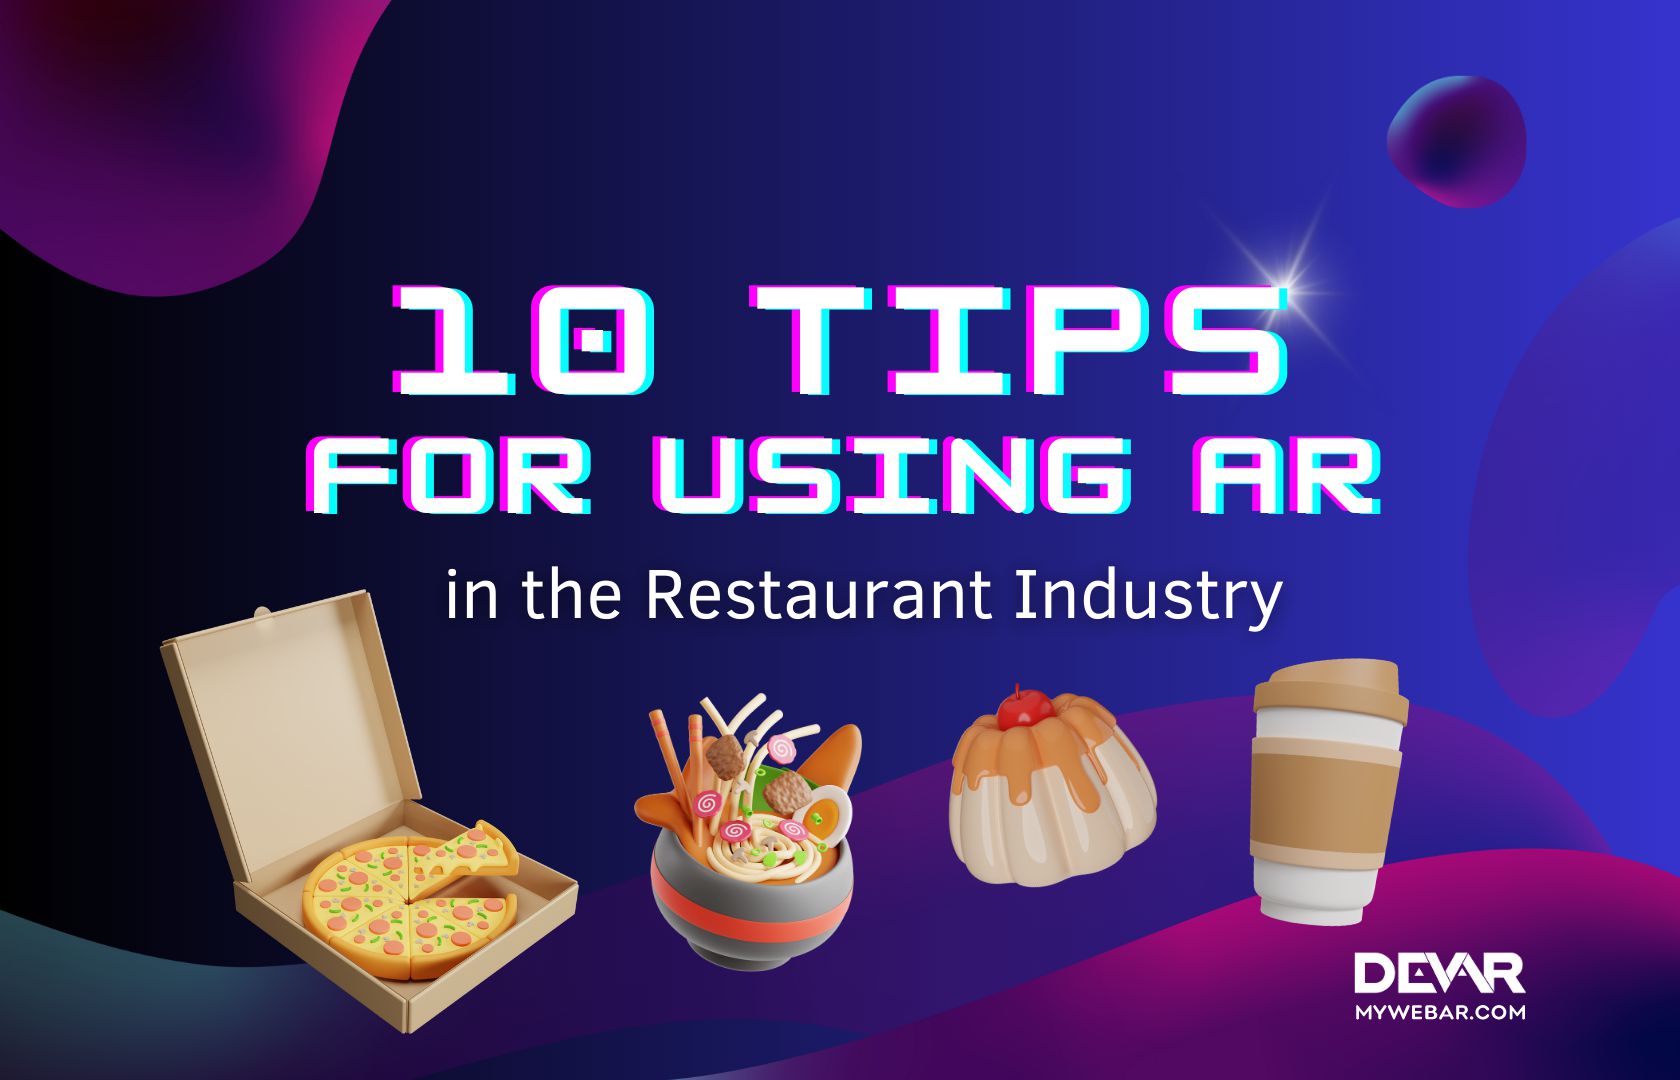 10 Tips for Using AR in the Restaurant Industry